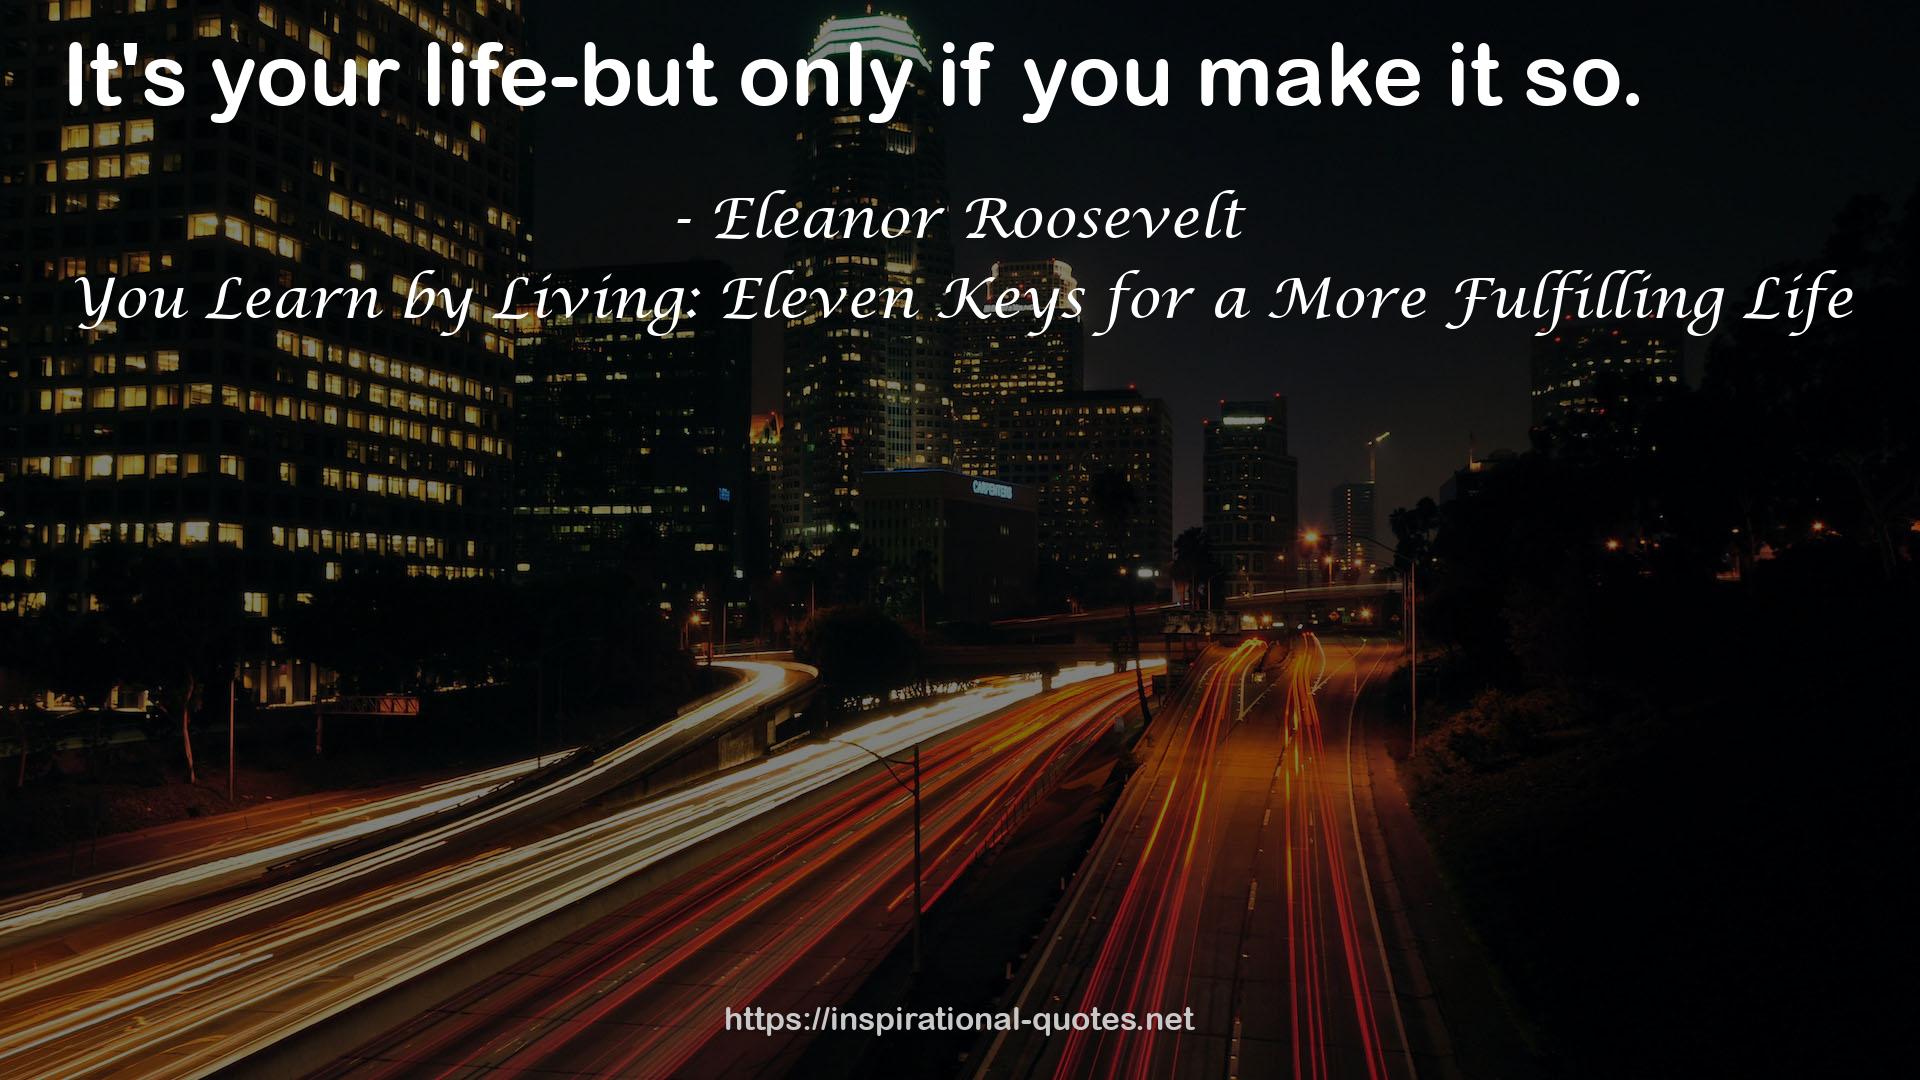 You Learn by Living: Eleven Keys for a More Fulfilling Life QUOTES